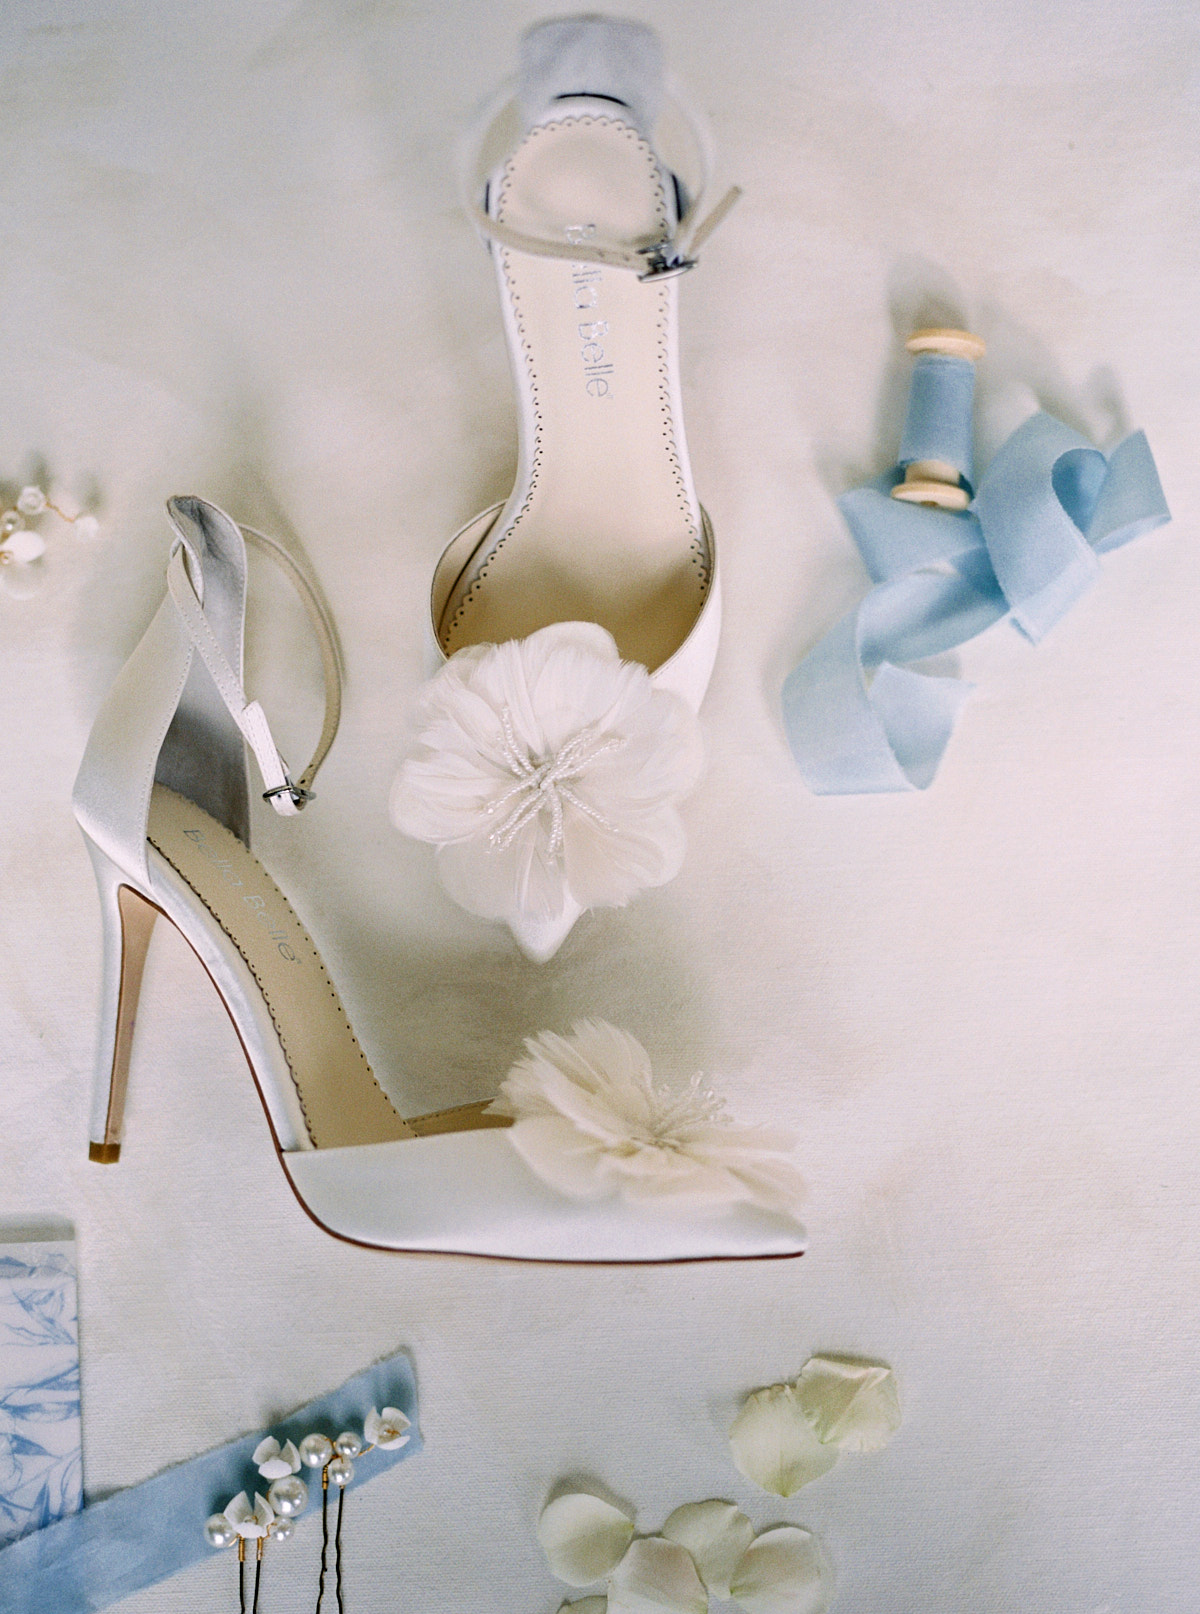 bella belle wedding shoes on a flat lay